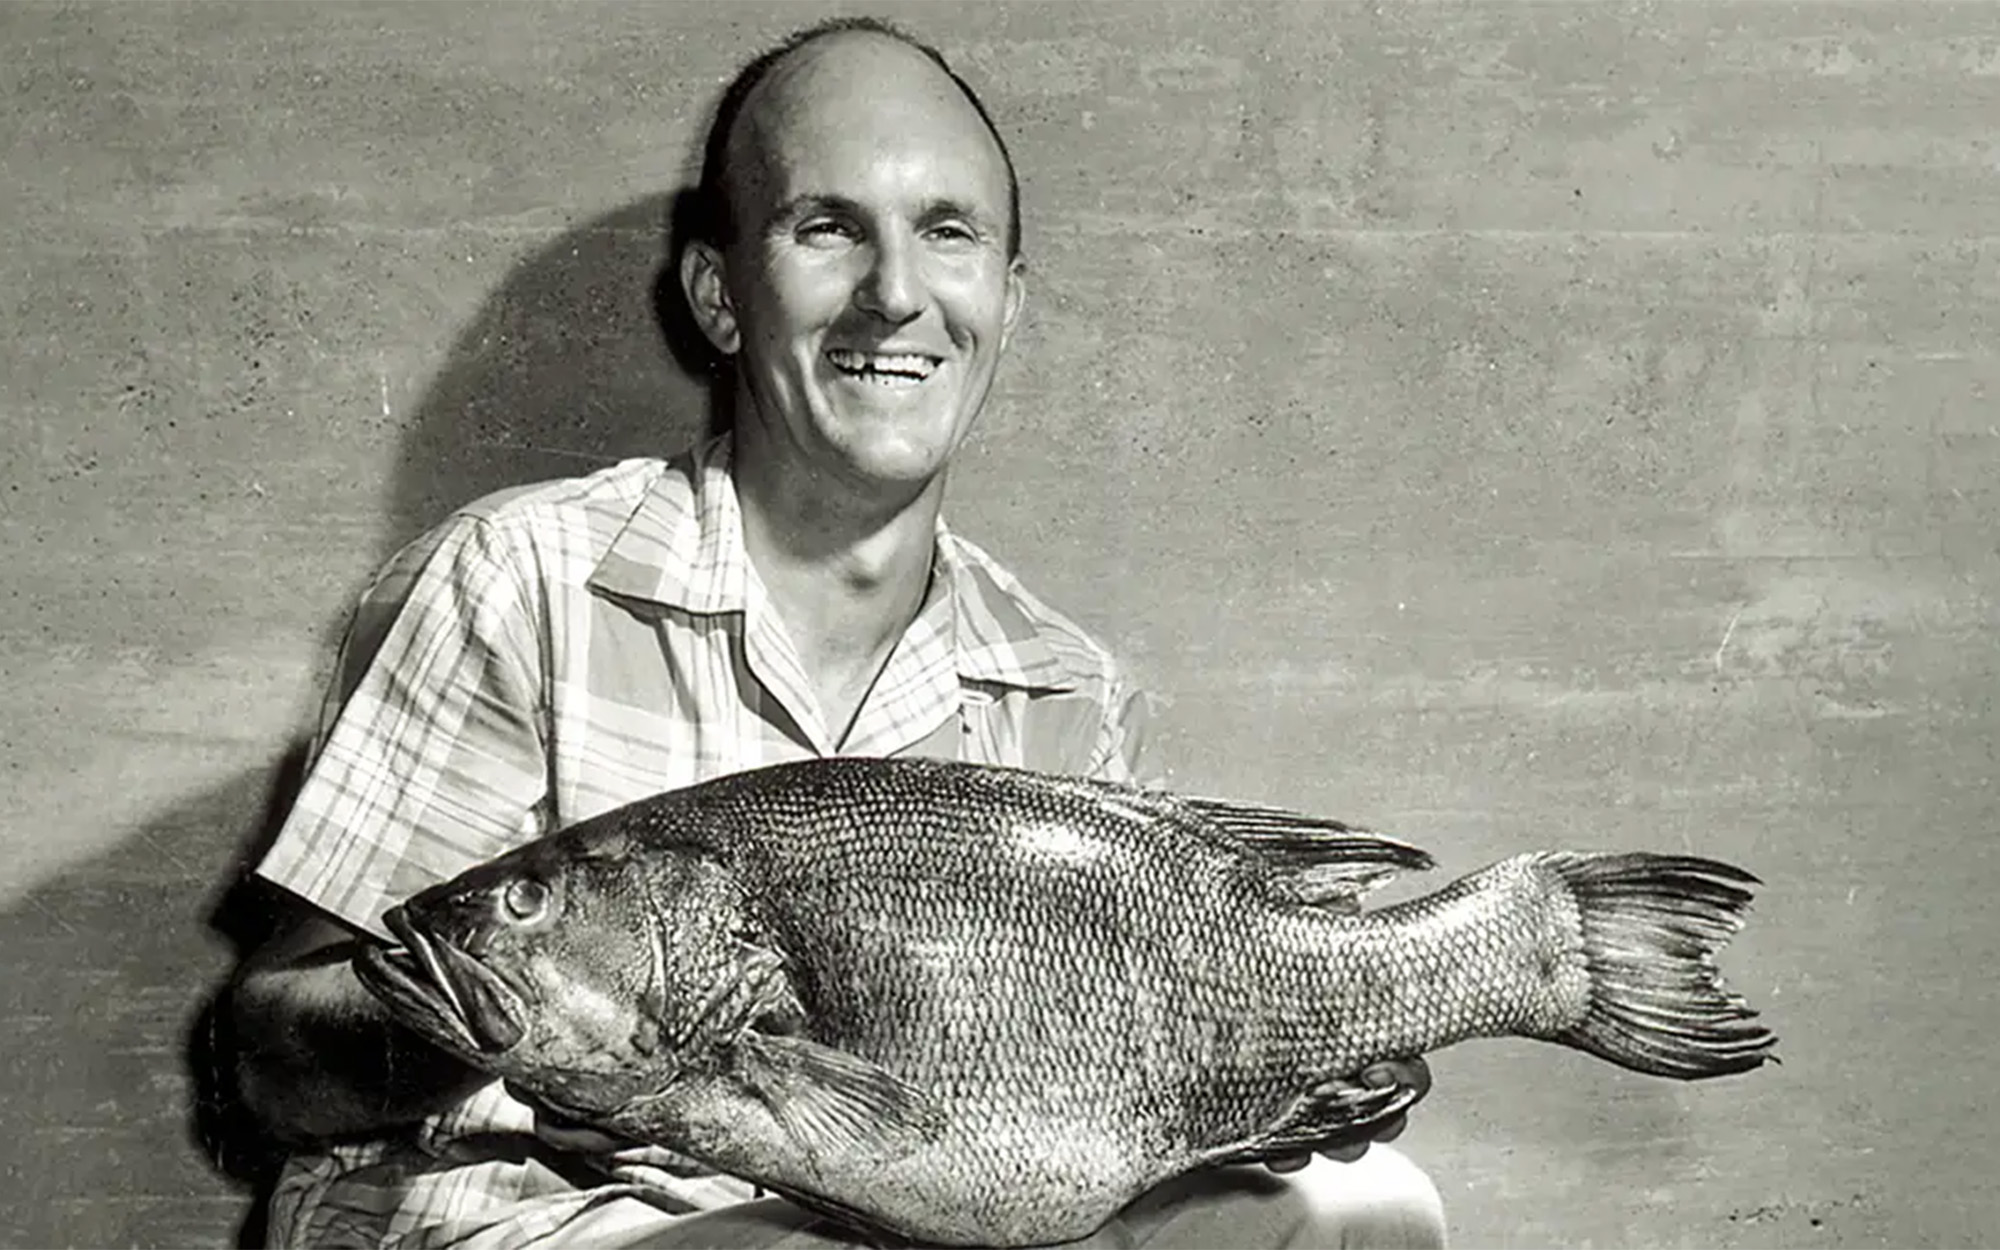 Angler with world-record smallmouth bass.